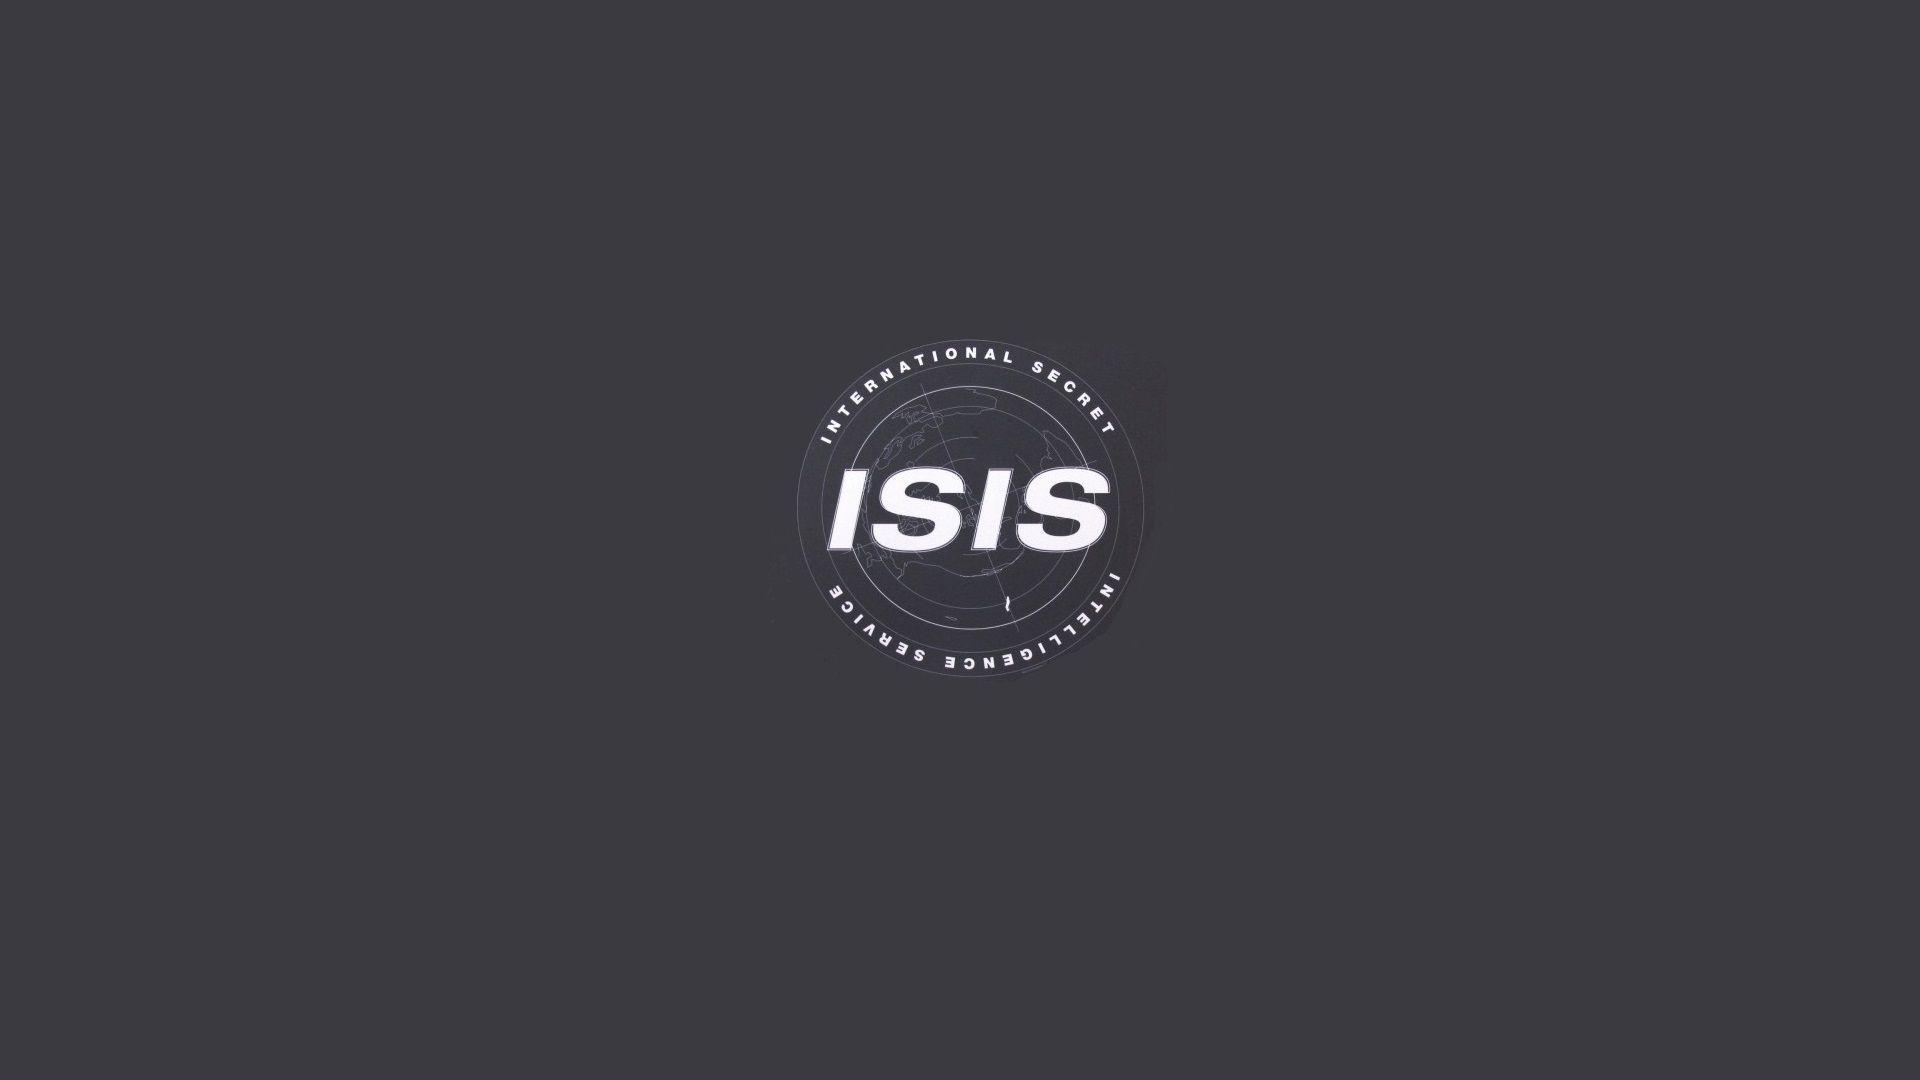 Archer ISIS Logo Background. Makes nice lock screen